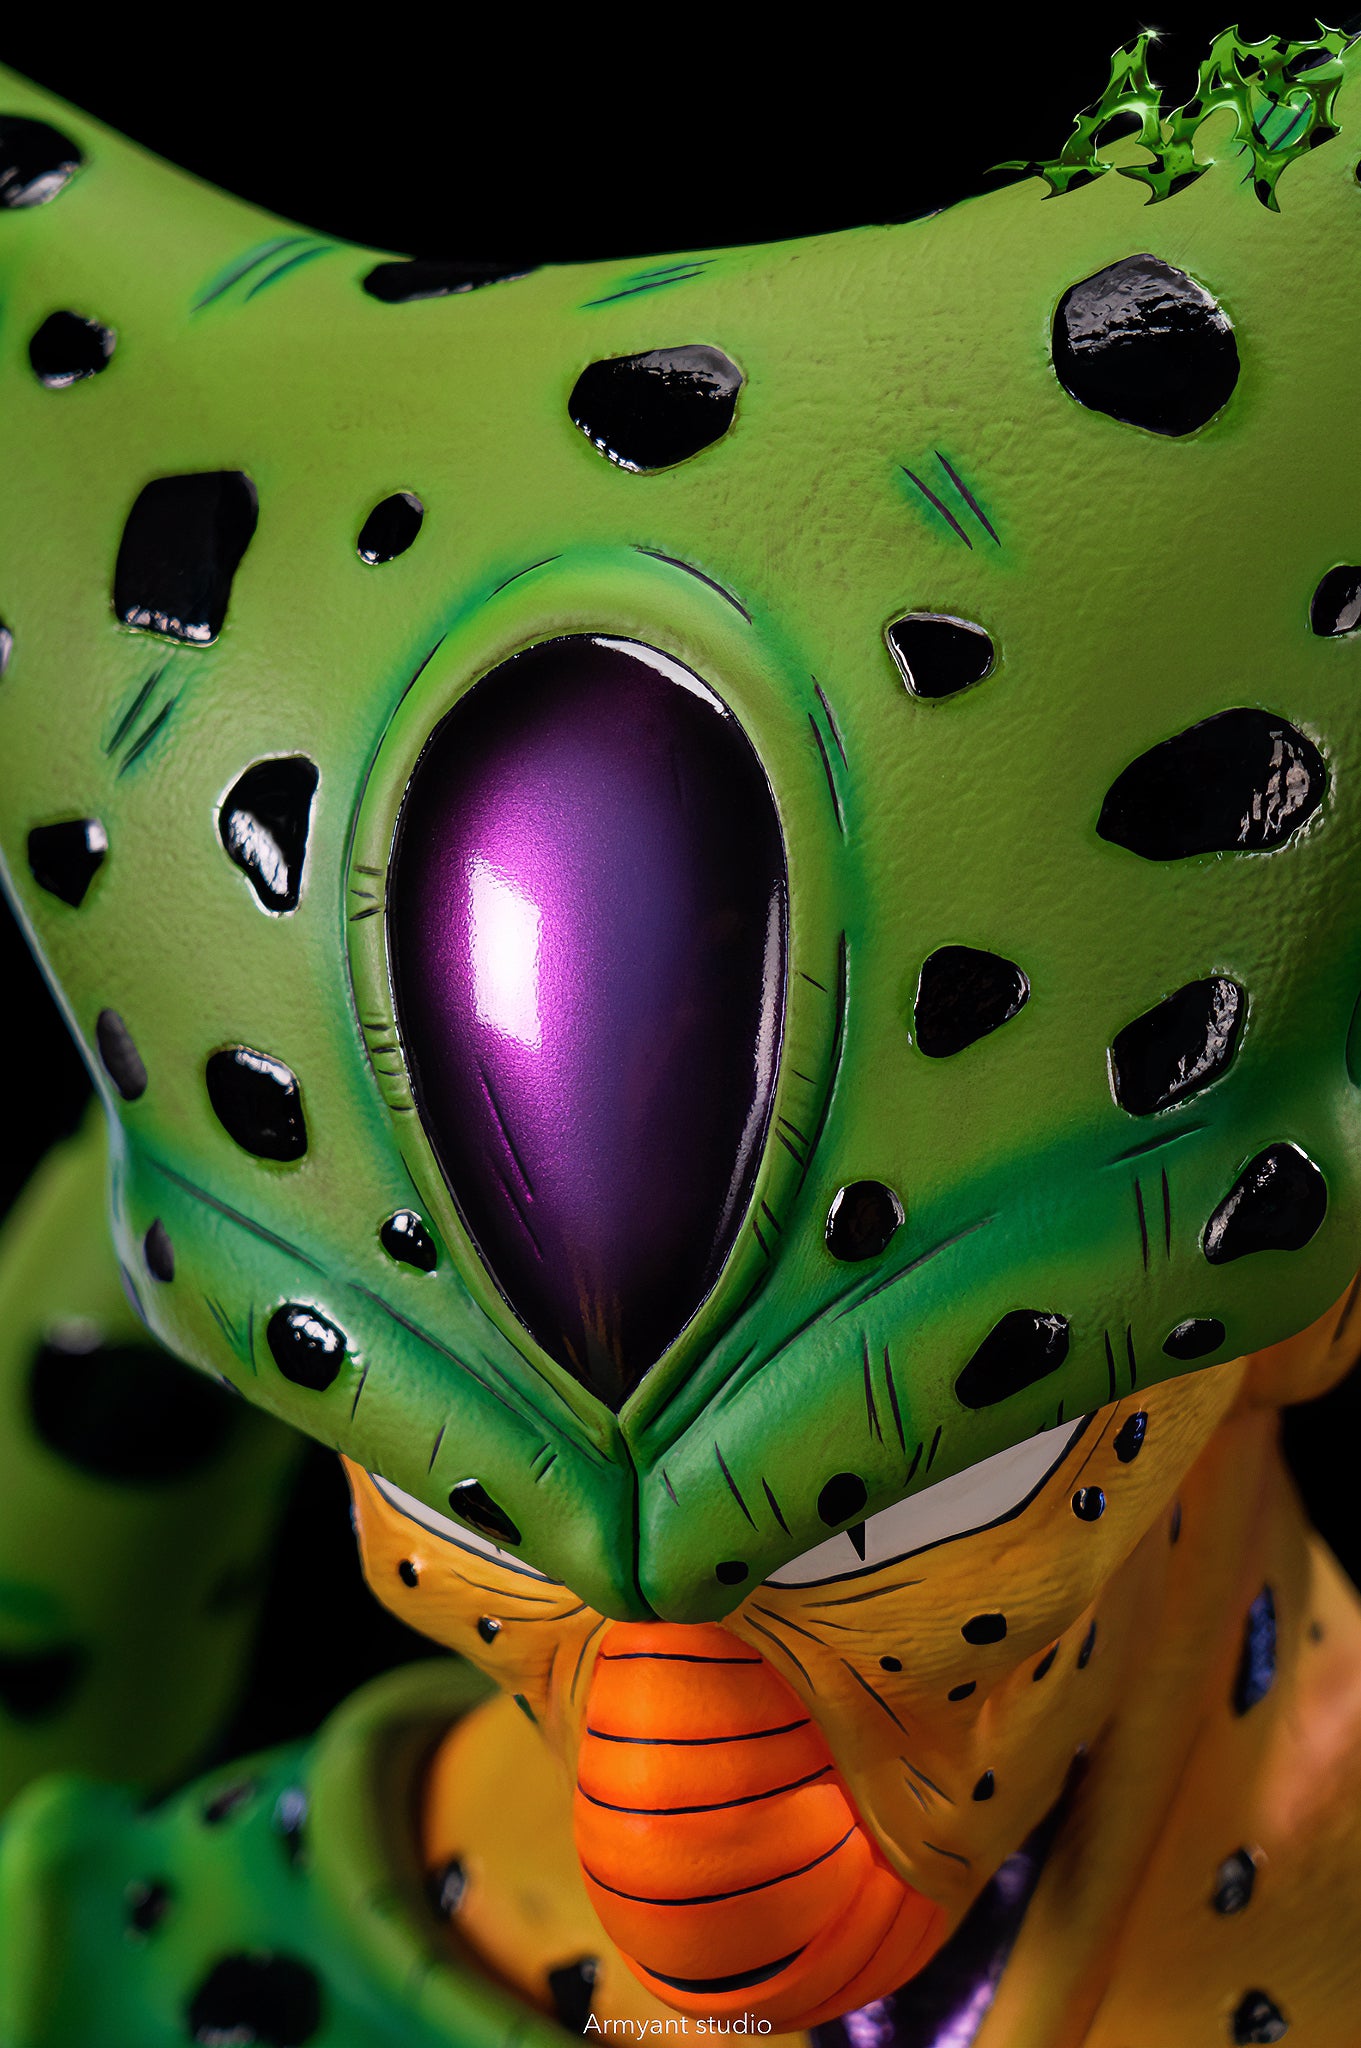 ARMYANT STUDIO – DRAGON BALL Z: ANDROIDS SAGA SERIES 1. IMPERFECT CELL BUST [IN STOCK]